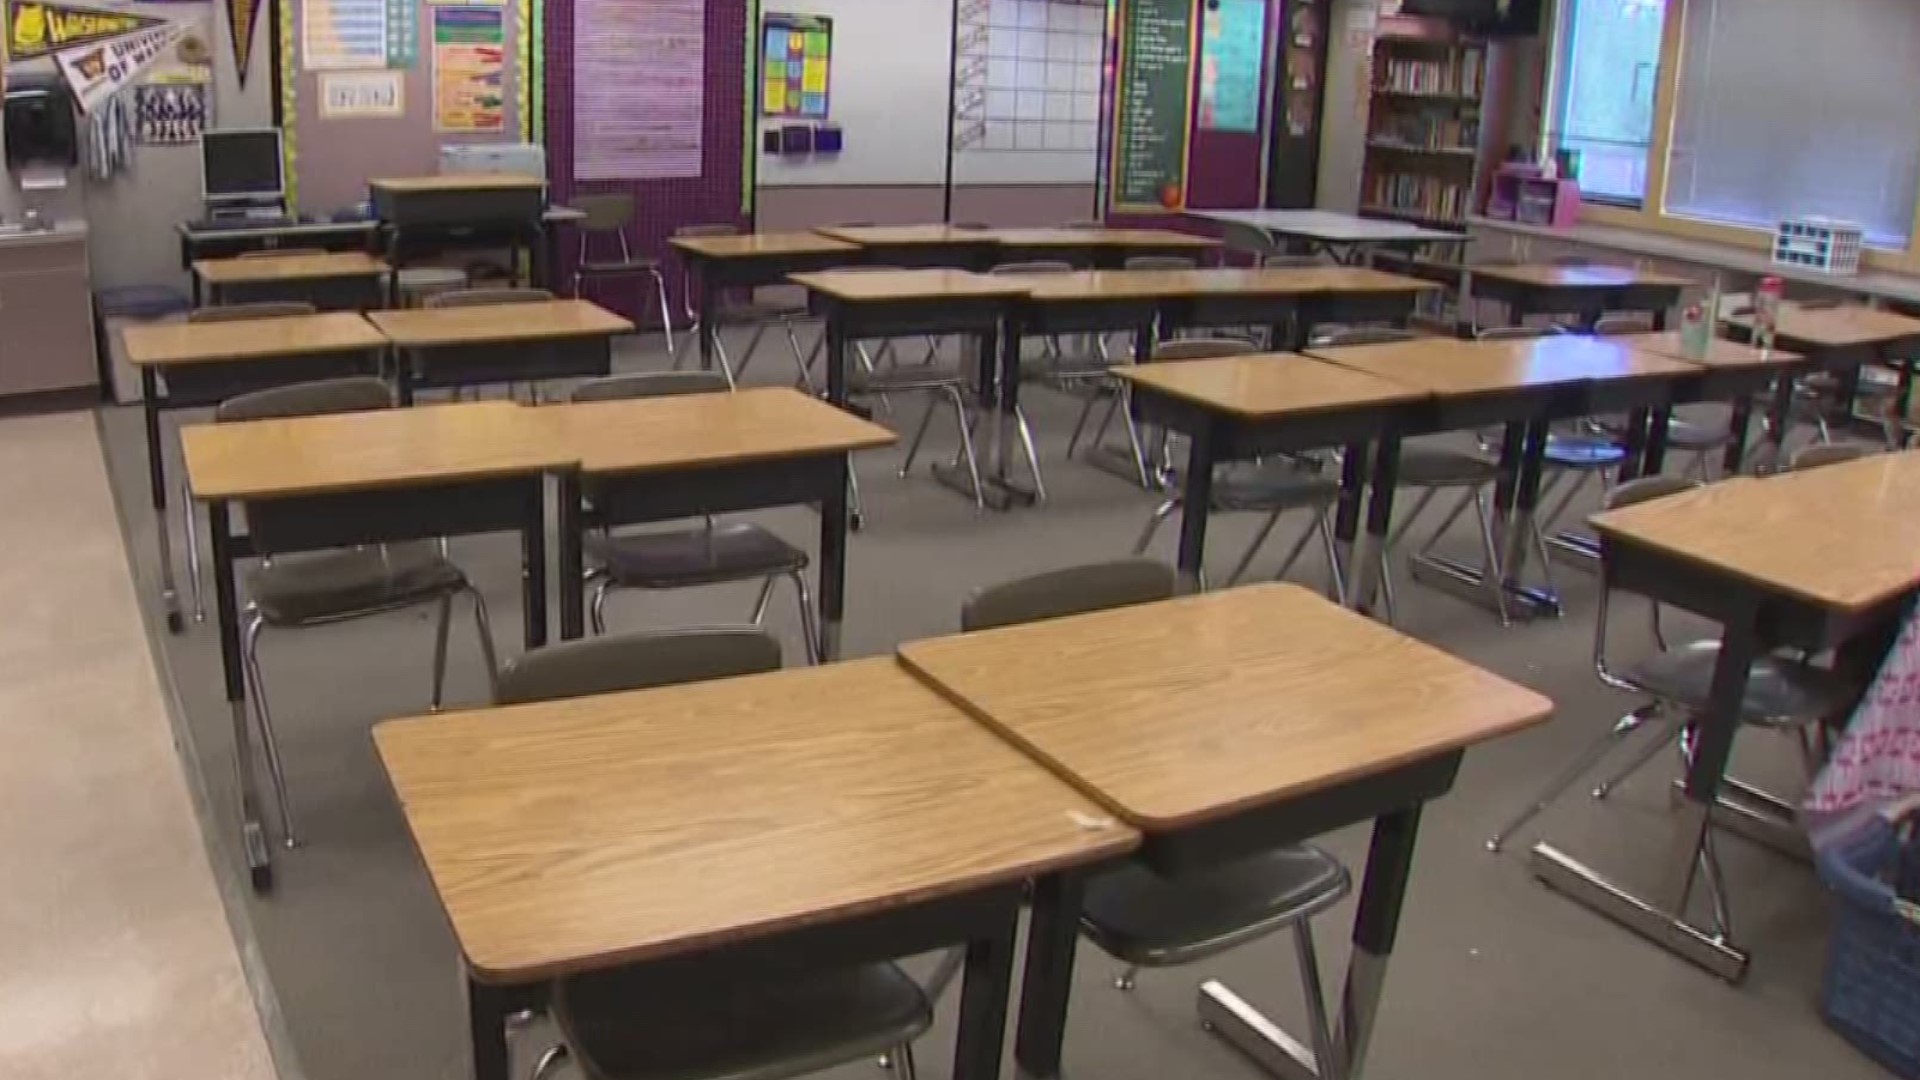 Teachers in Washington state’s largest districts are still negotiating union contracts with just a few weeks until the first day of class. Last year, disagreements led to strikes in some communities, inconveniencing thousands of families. KING 5’s Ted Land reports.